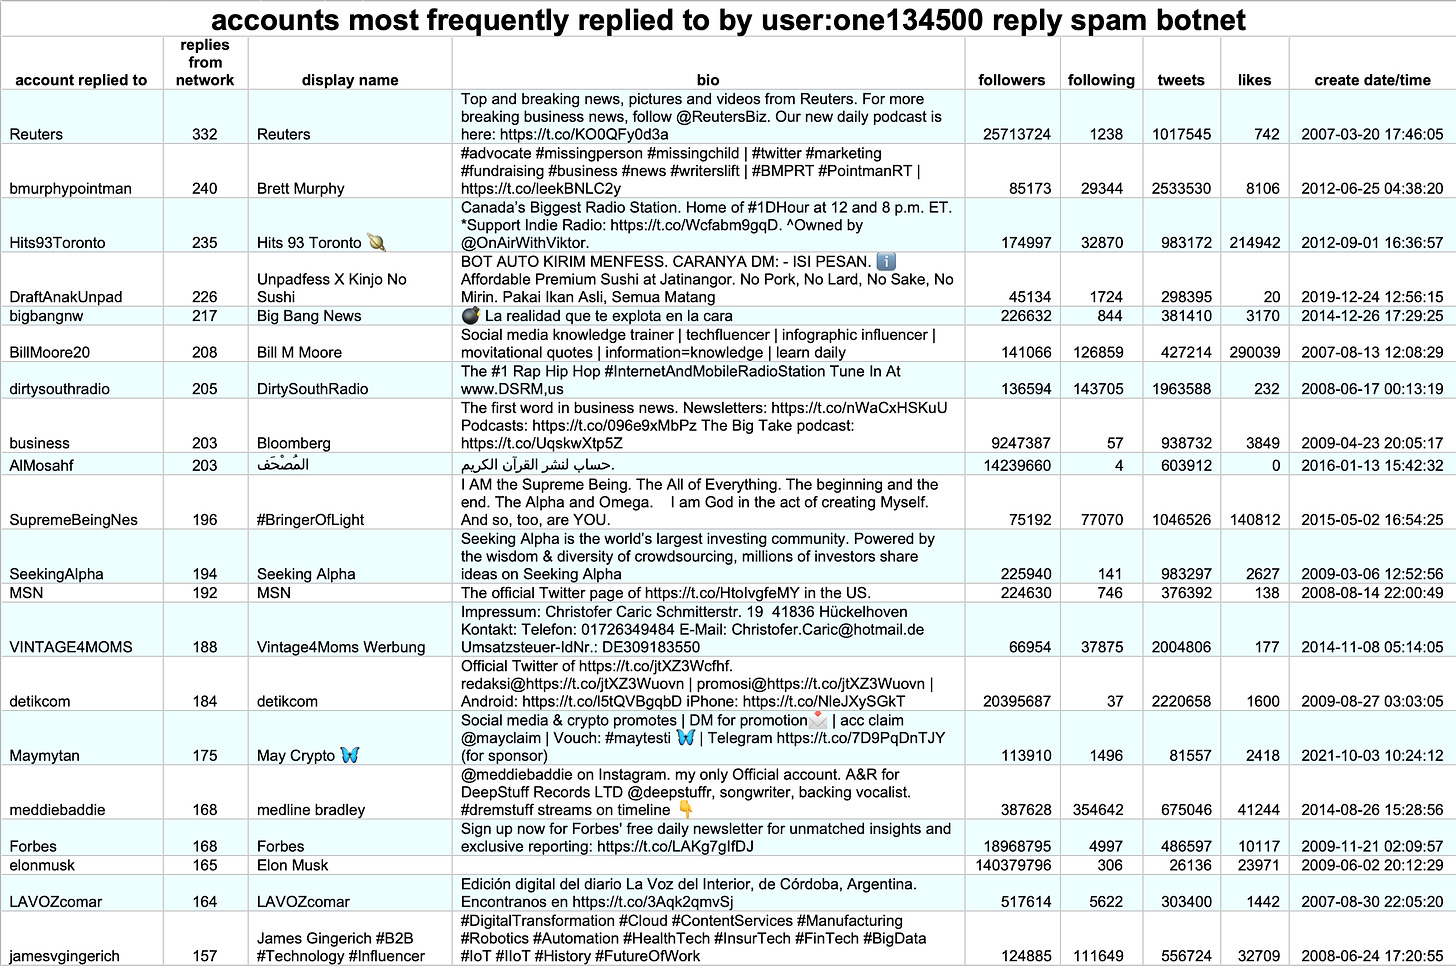 table of accounts most frequently replied to by the spam network